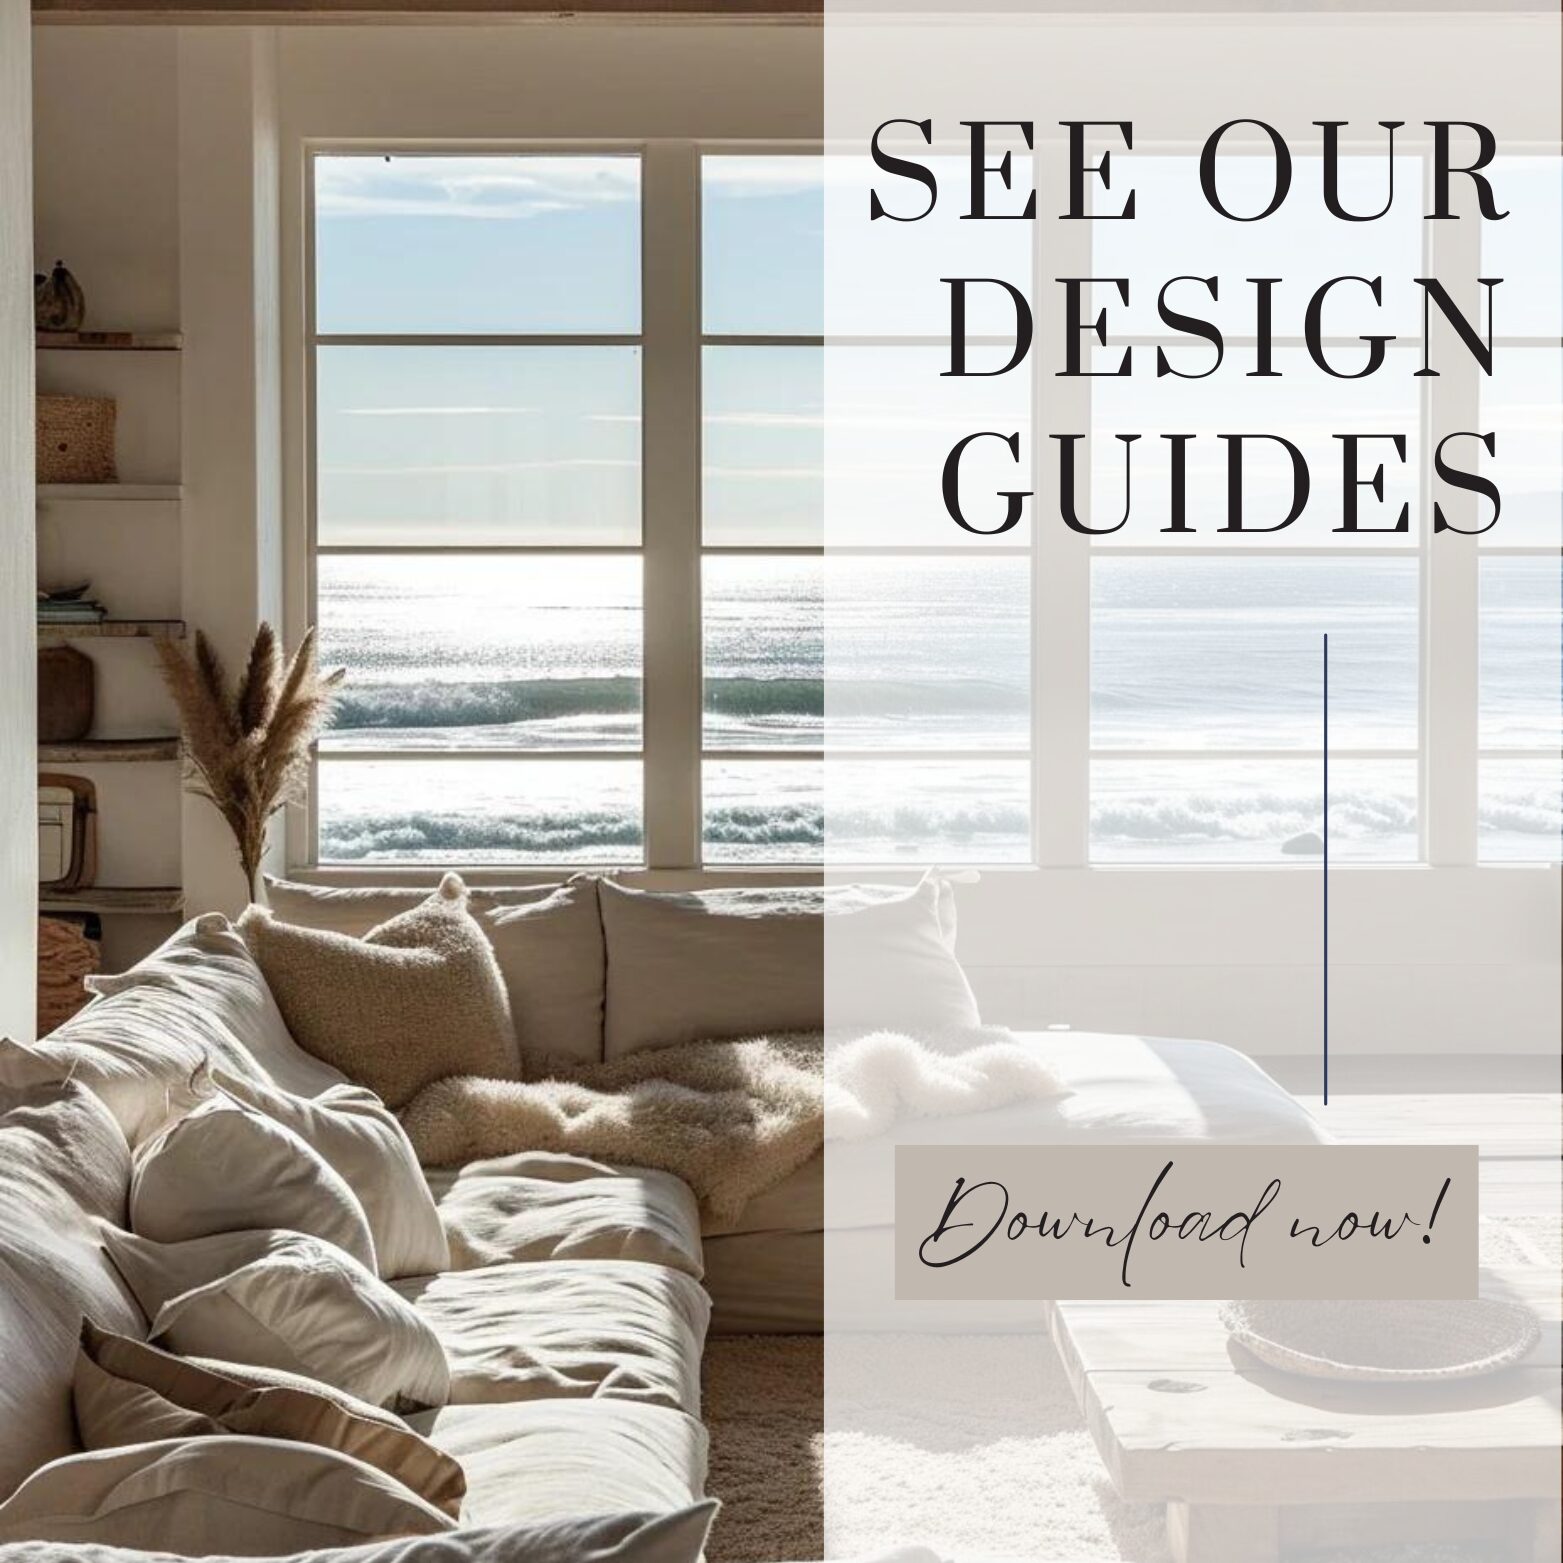 Design Library - See Our Design Guides